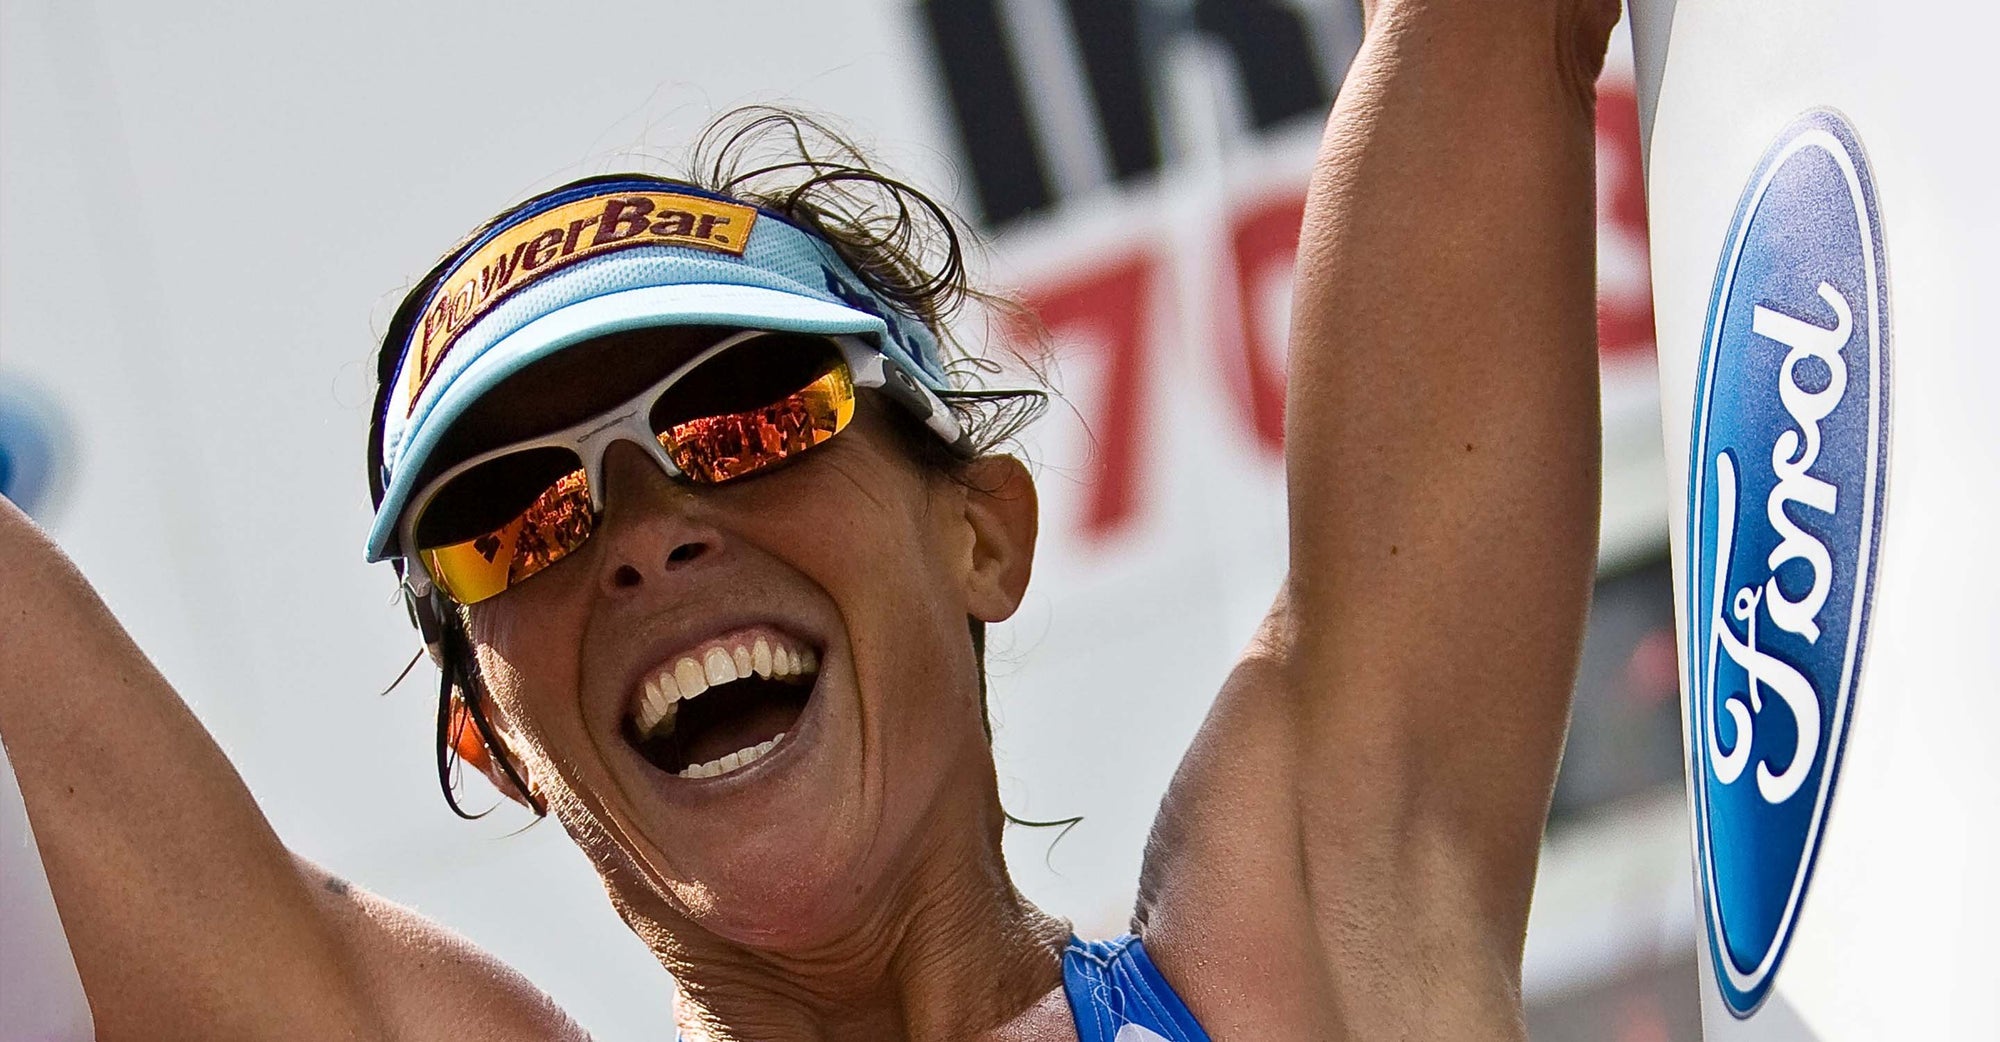 Lisa Bentley triumphantly smiling at the finish of a race